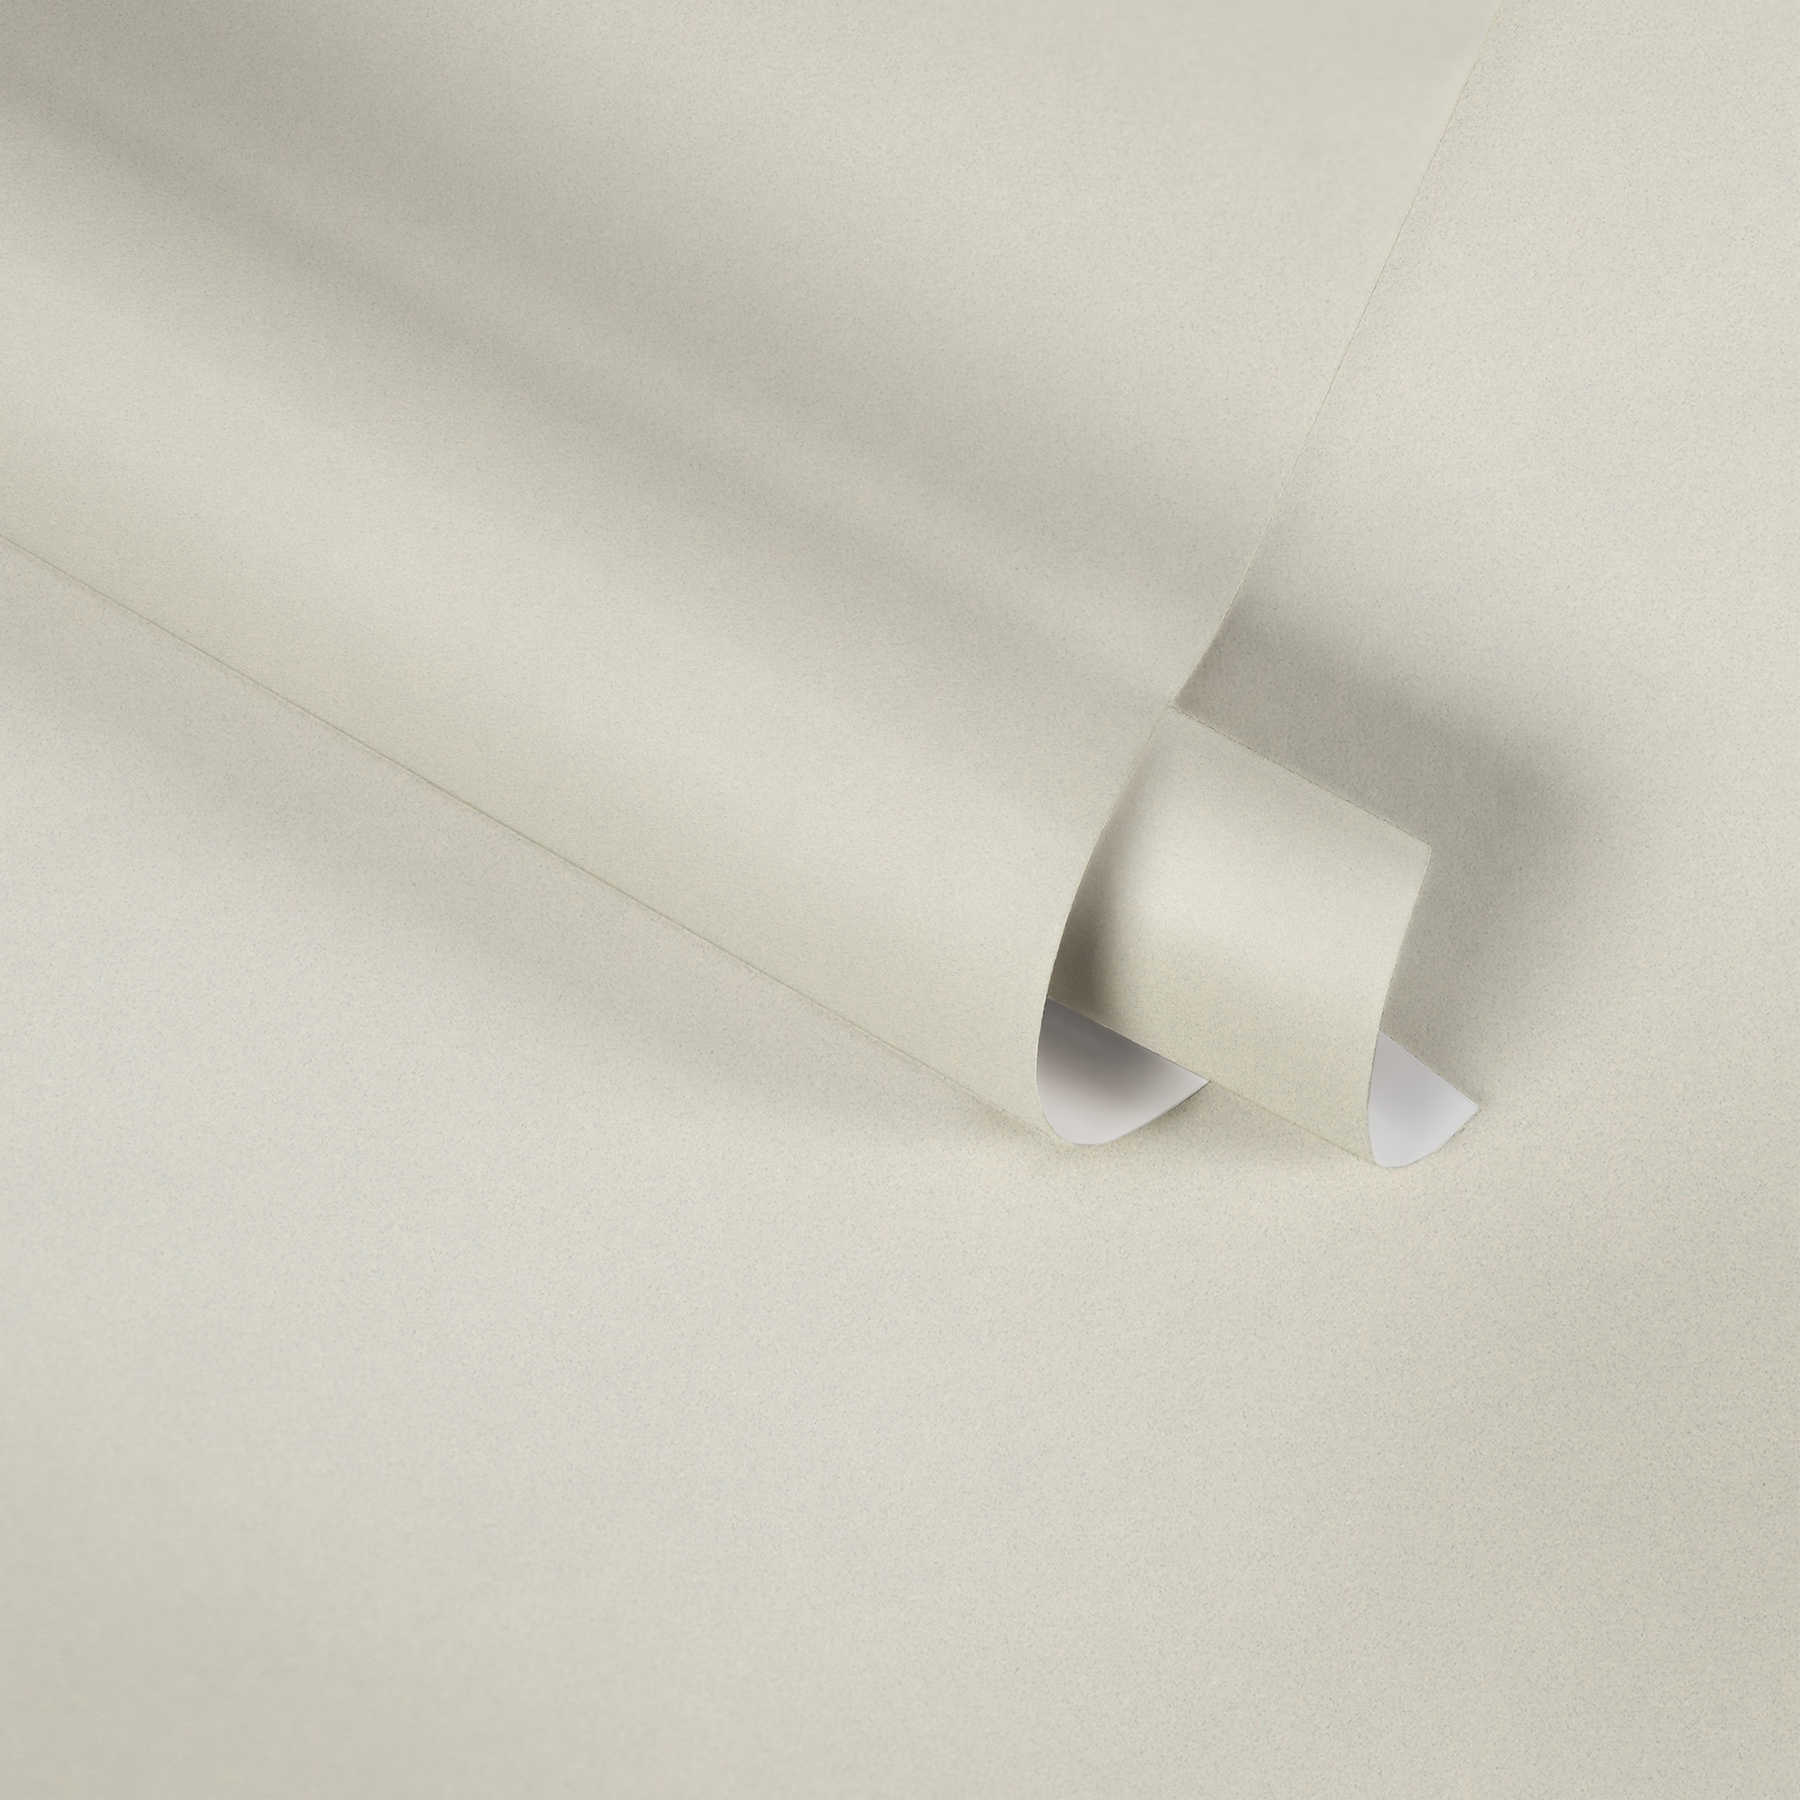             Minimalist plain wallpaper with muted colour - cream
        